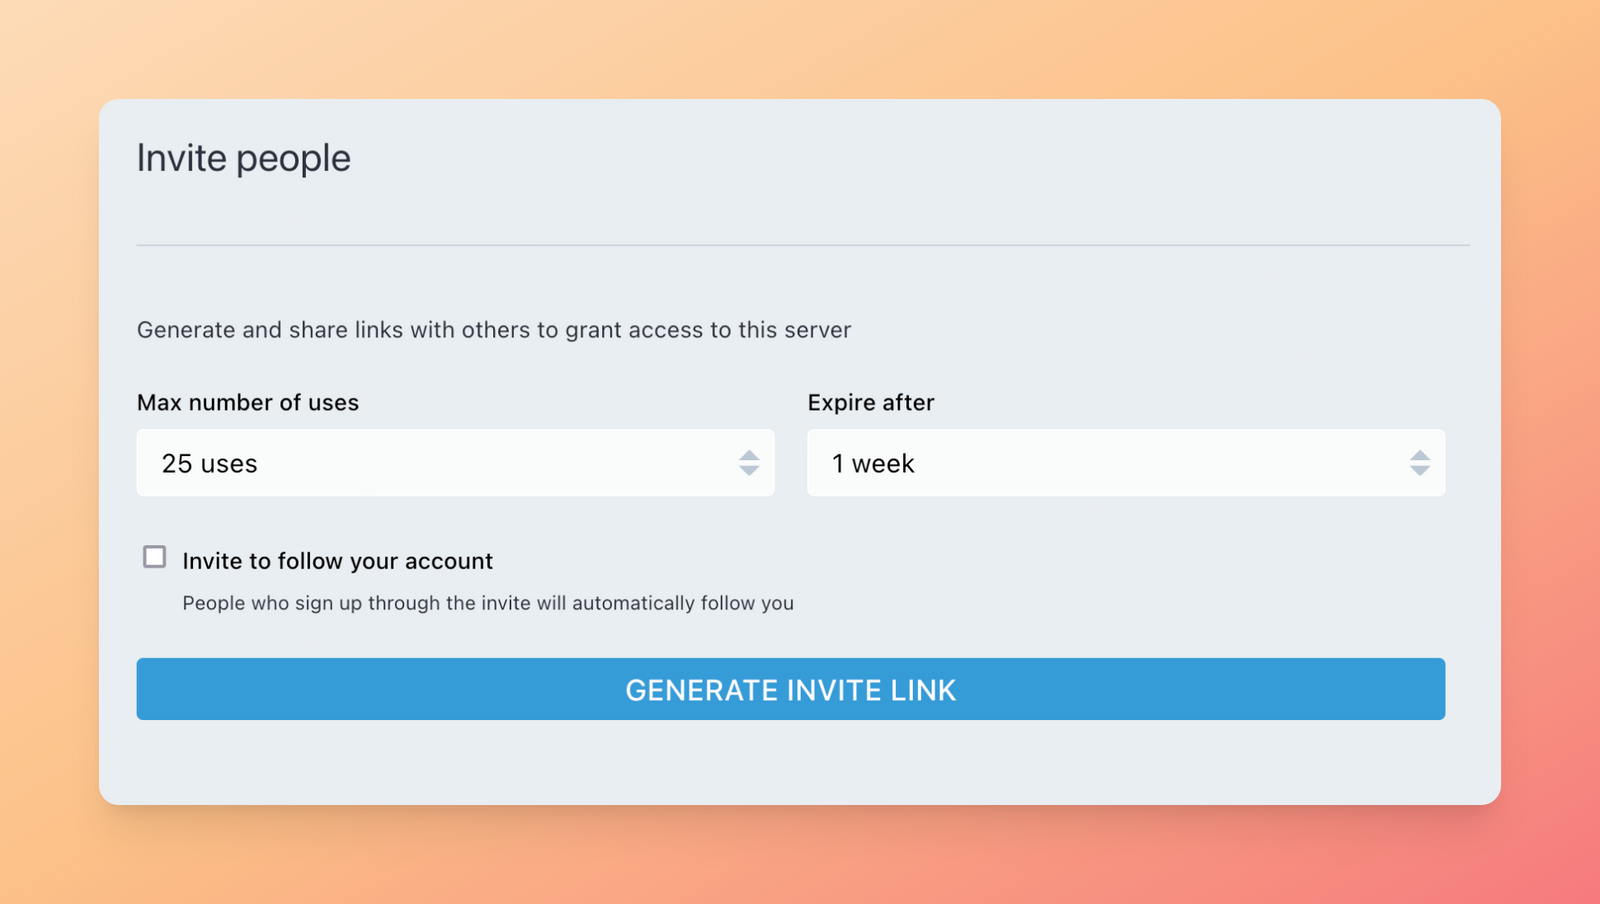 A screenshot of Mastodon's interface that allows you to generate invitation links and limit the number of users allowed on a server